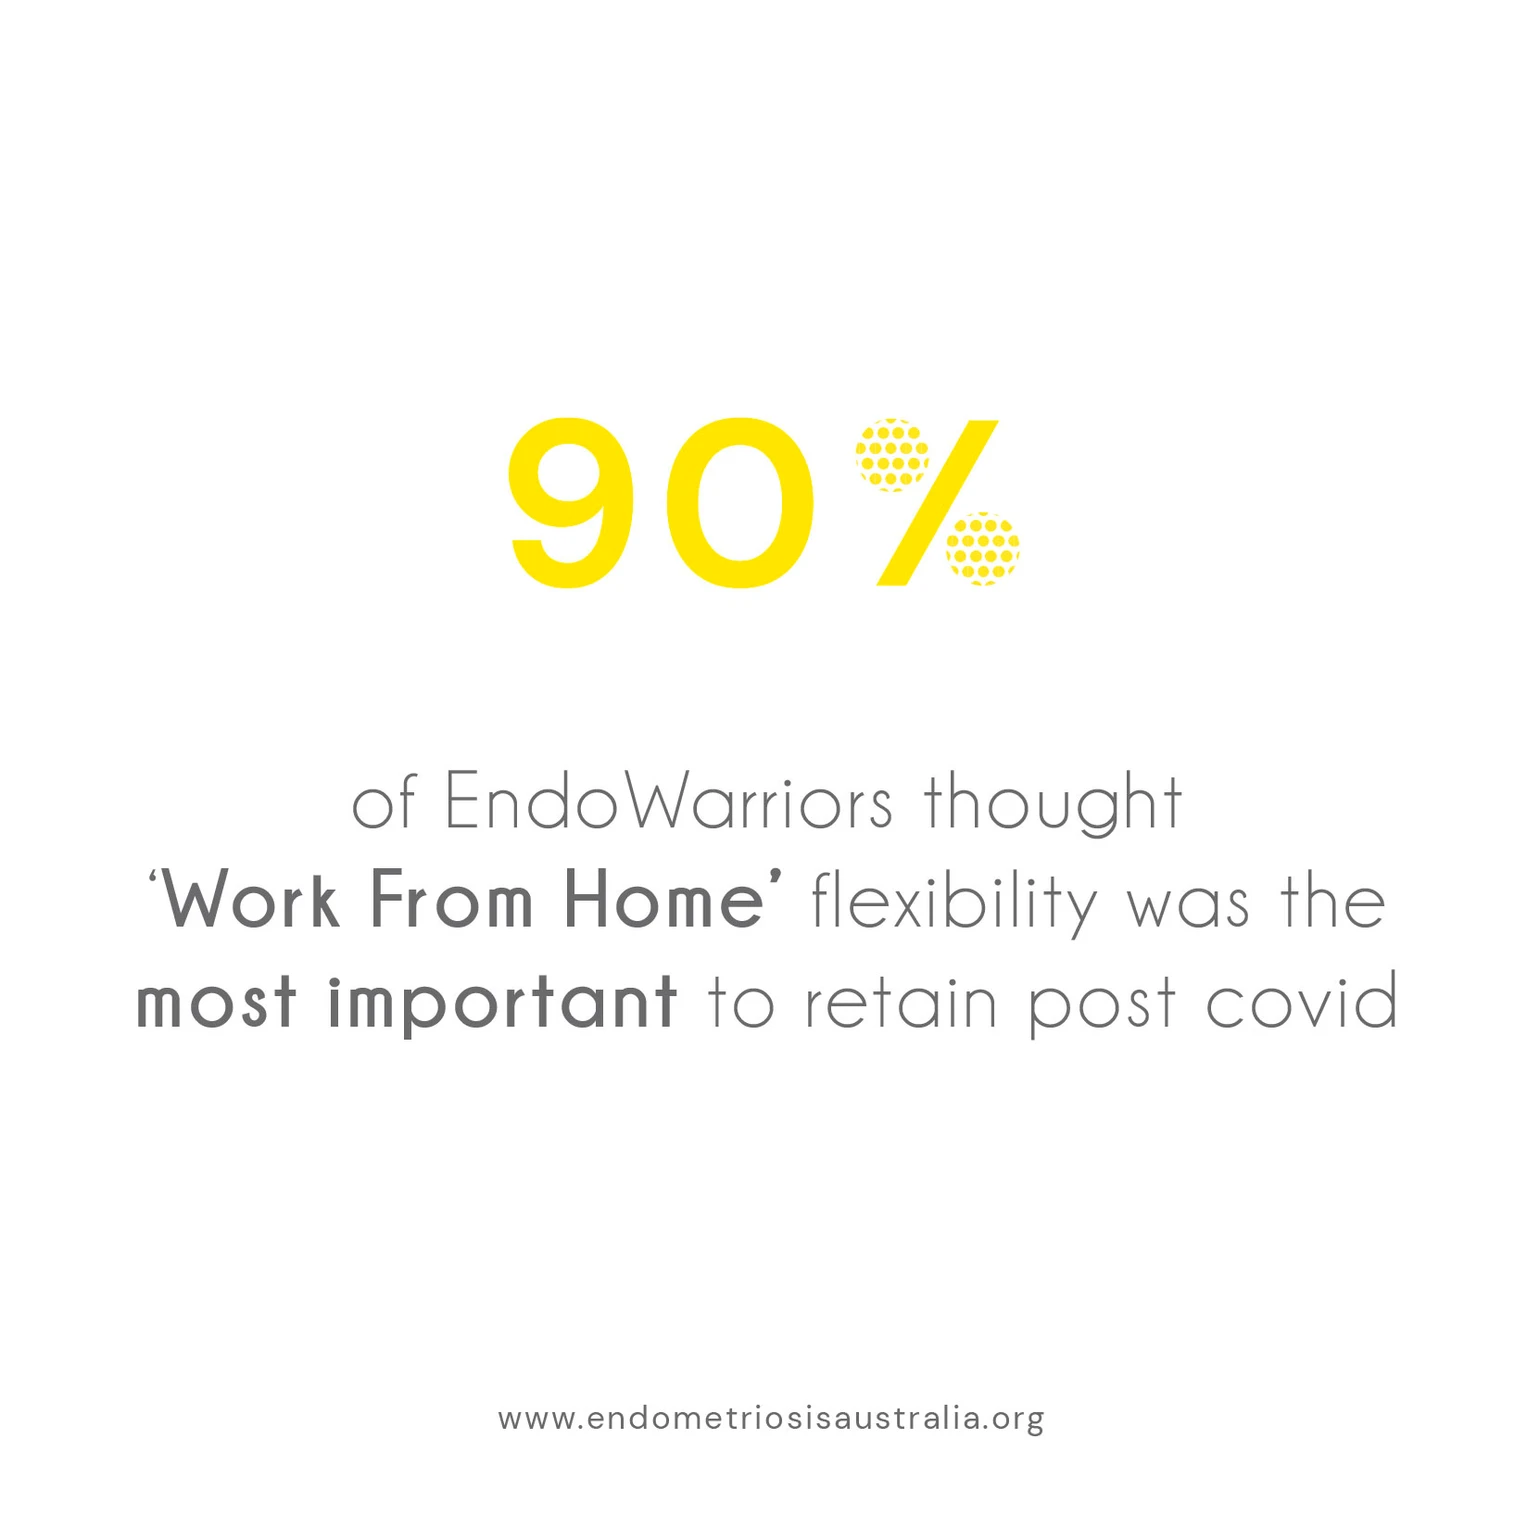 90% of Endo Warriors thought Work From Home flexibility was the most important to retain post covid